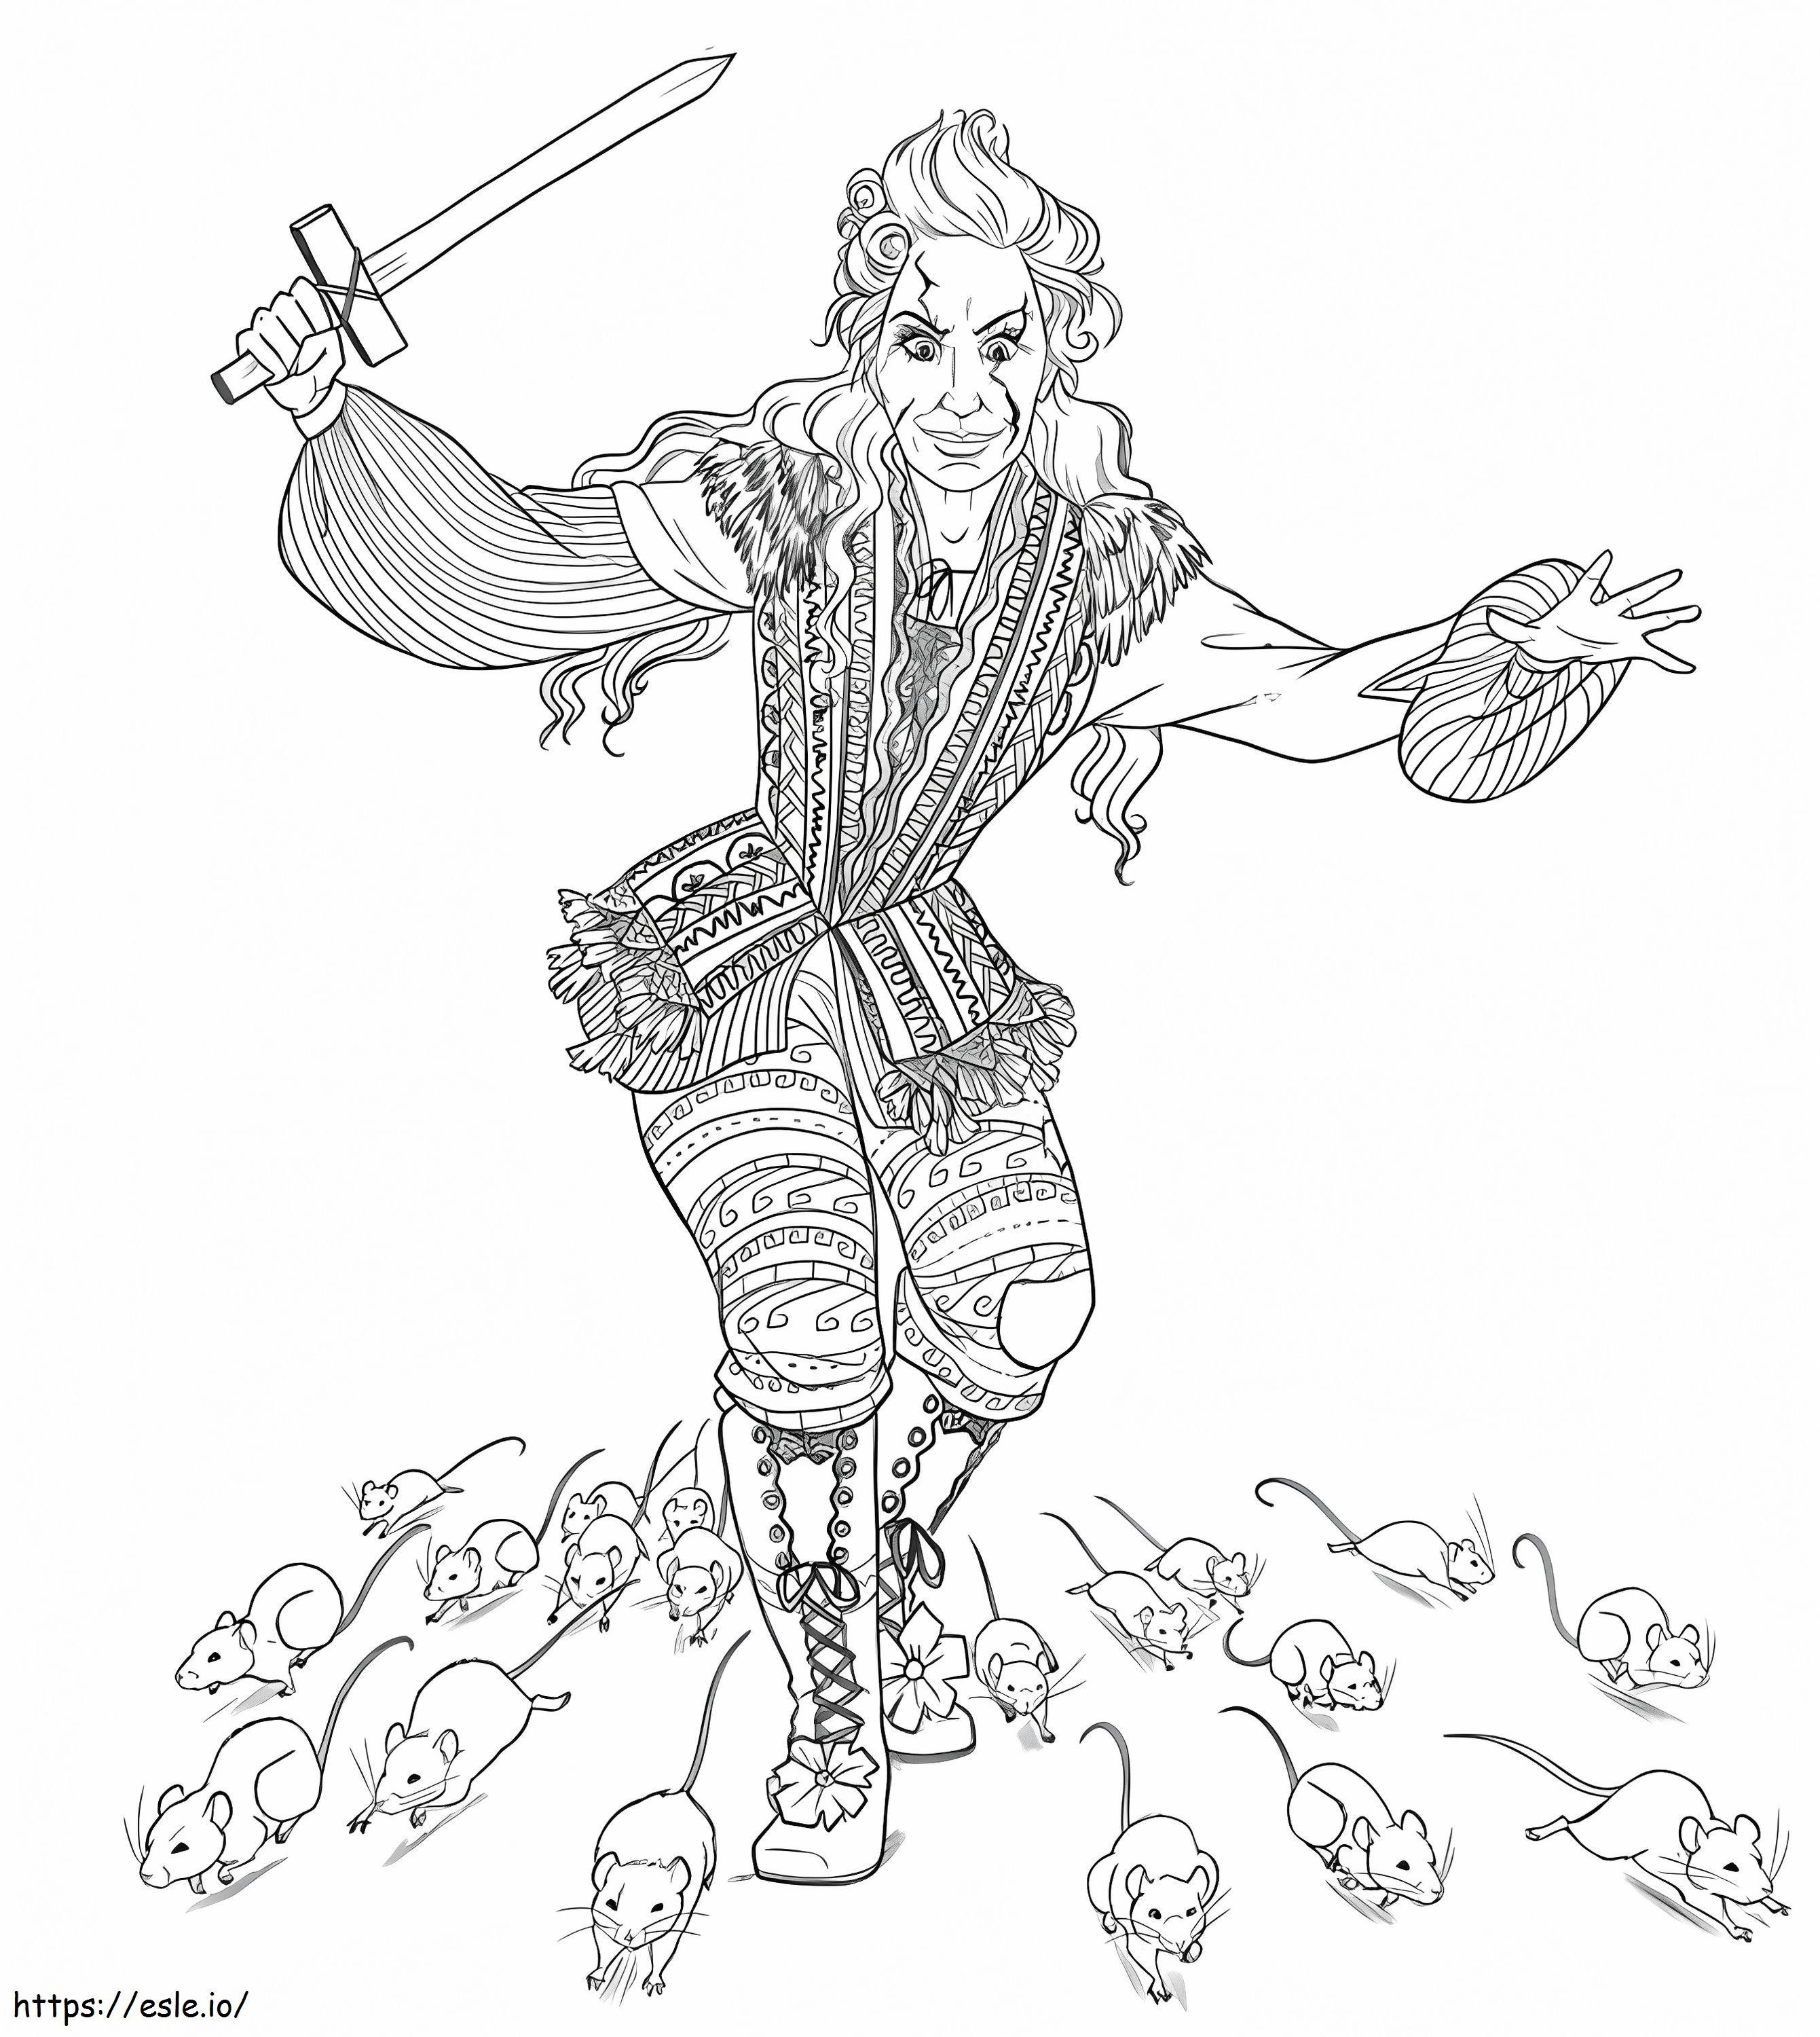 1562205051_Mother Ginger A4 coloring page